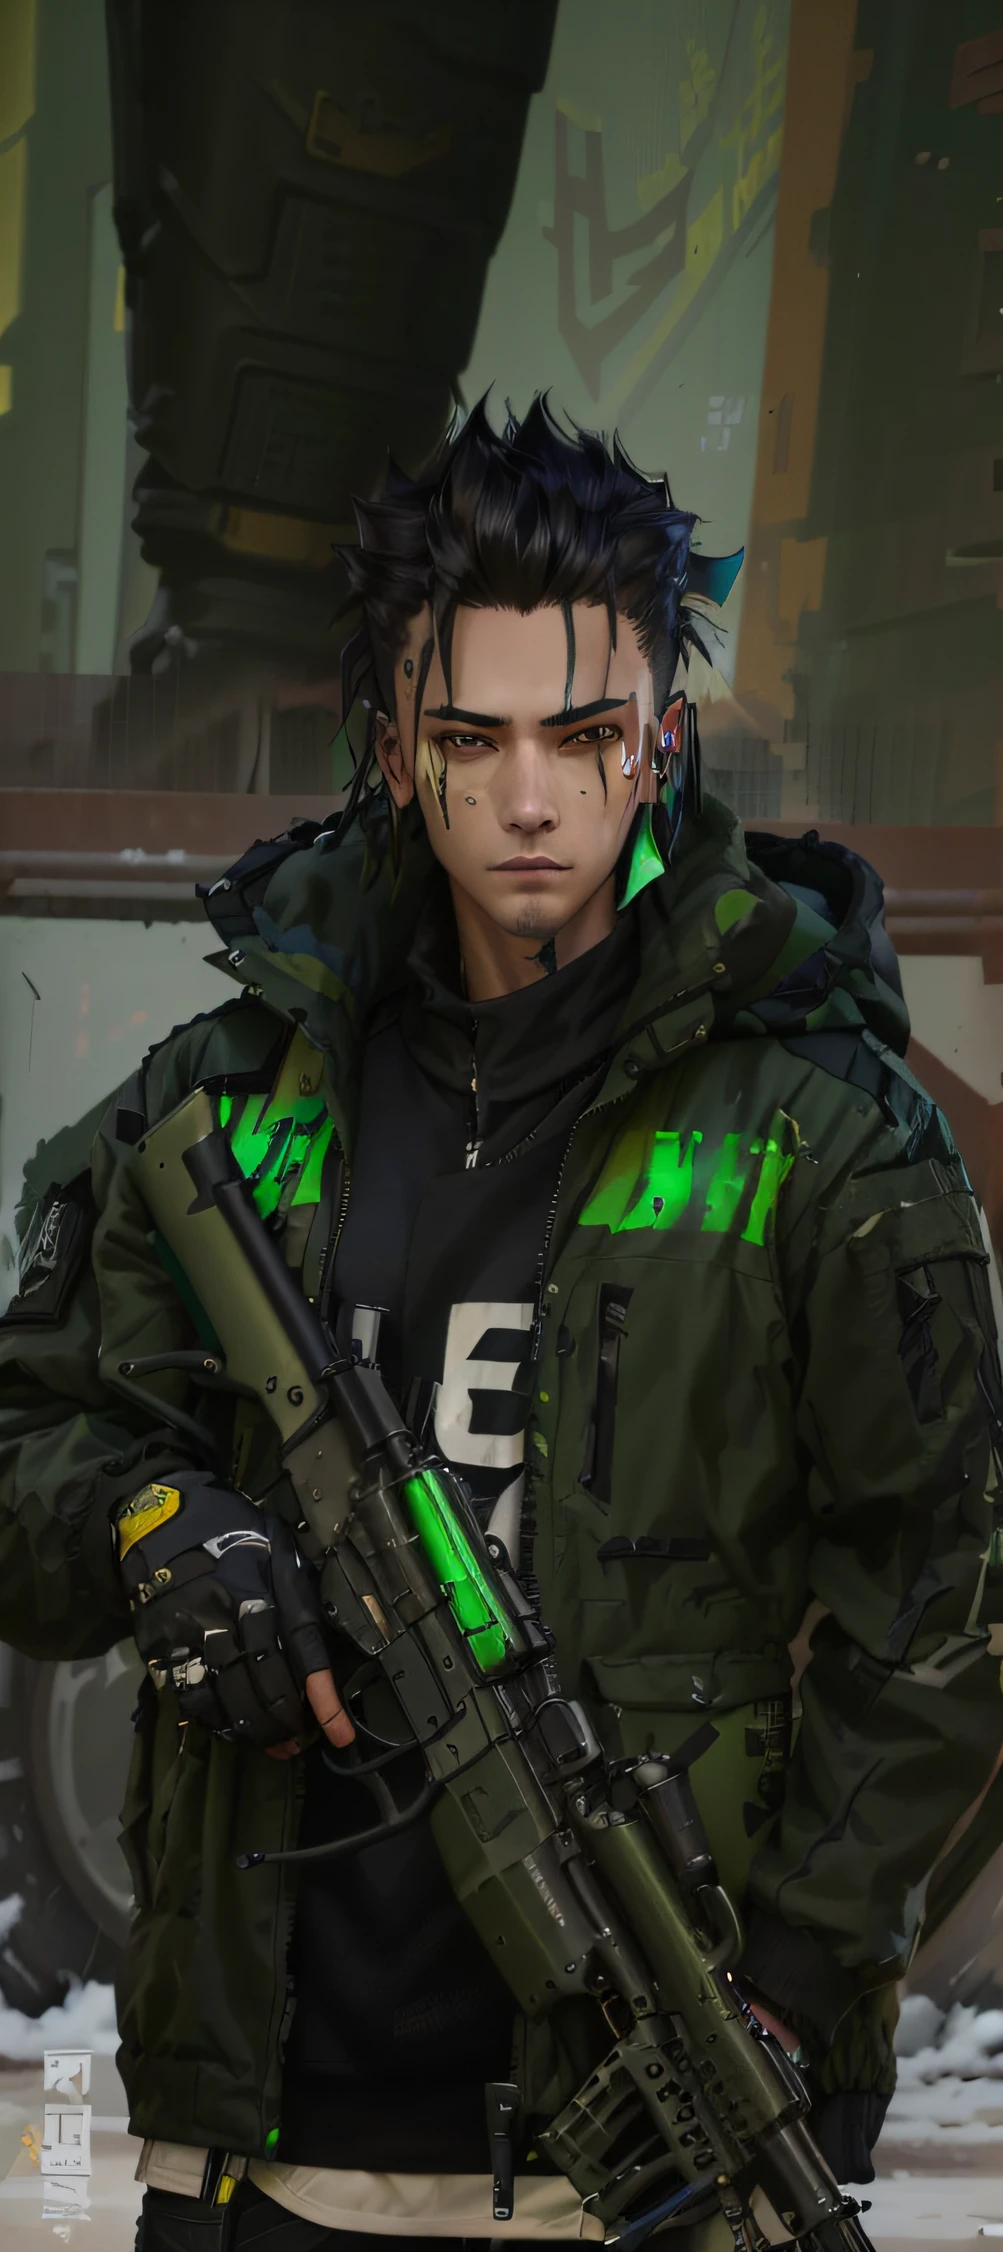 one man, arafed man in a green jacket holding a gun and a green jacket, cyberpunk street goon, character close up, in game, close up character, character close-up, mechanic punk outfit, male character, an edgy teen assassin, m4 sopmod ii girls frontline, inspired by Jang Seung-eop, with very highly detailed face and hair